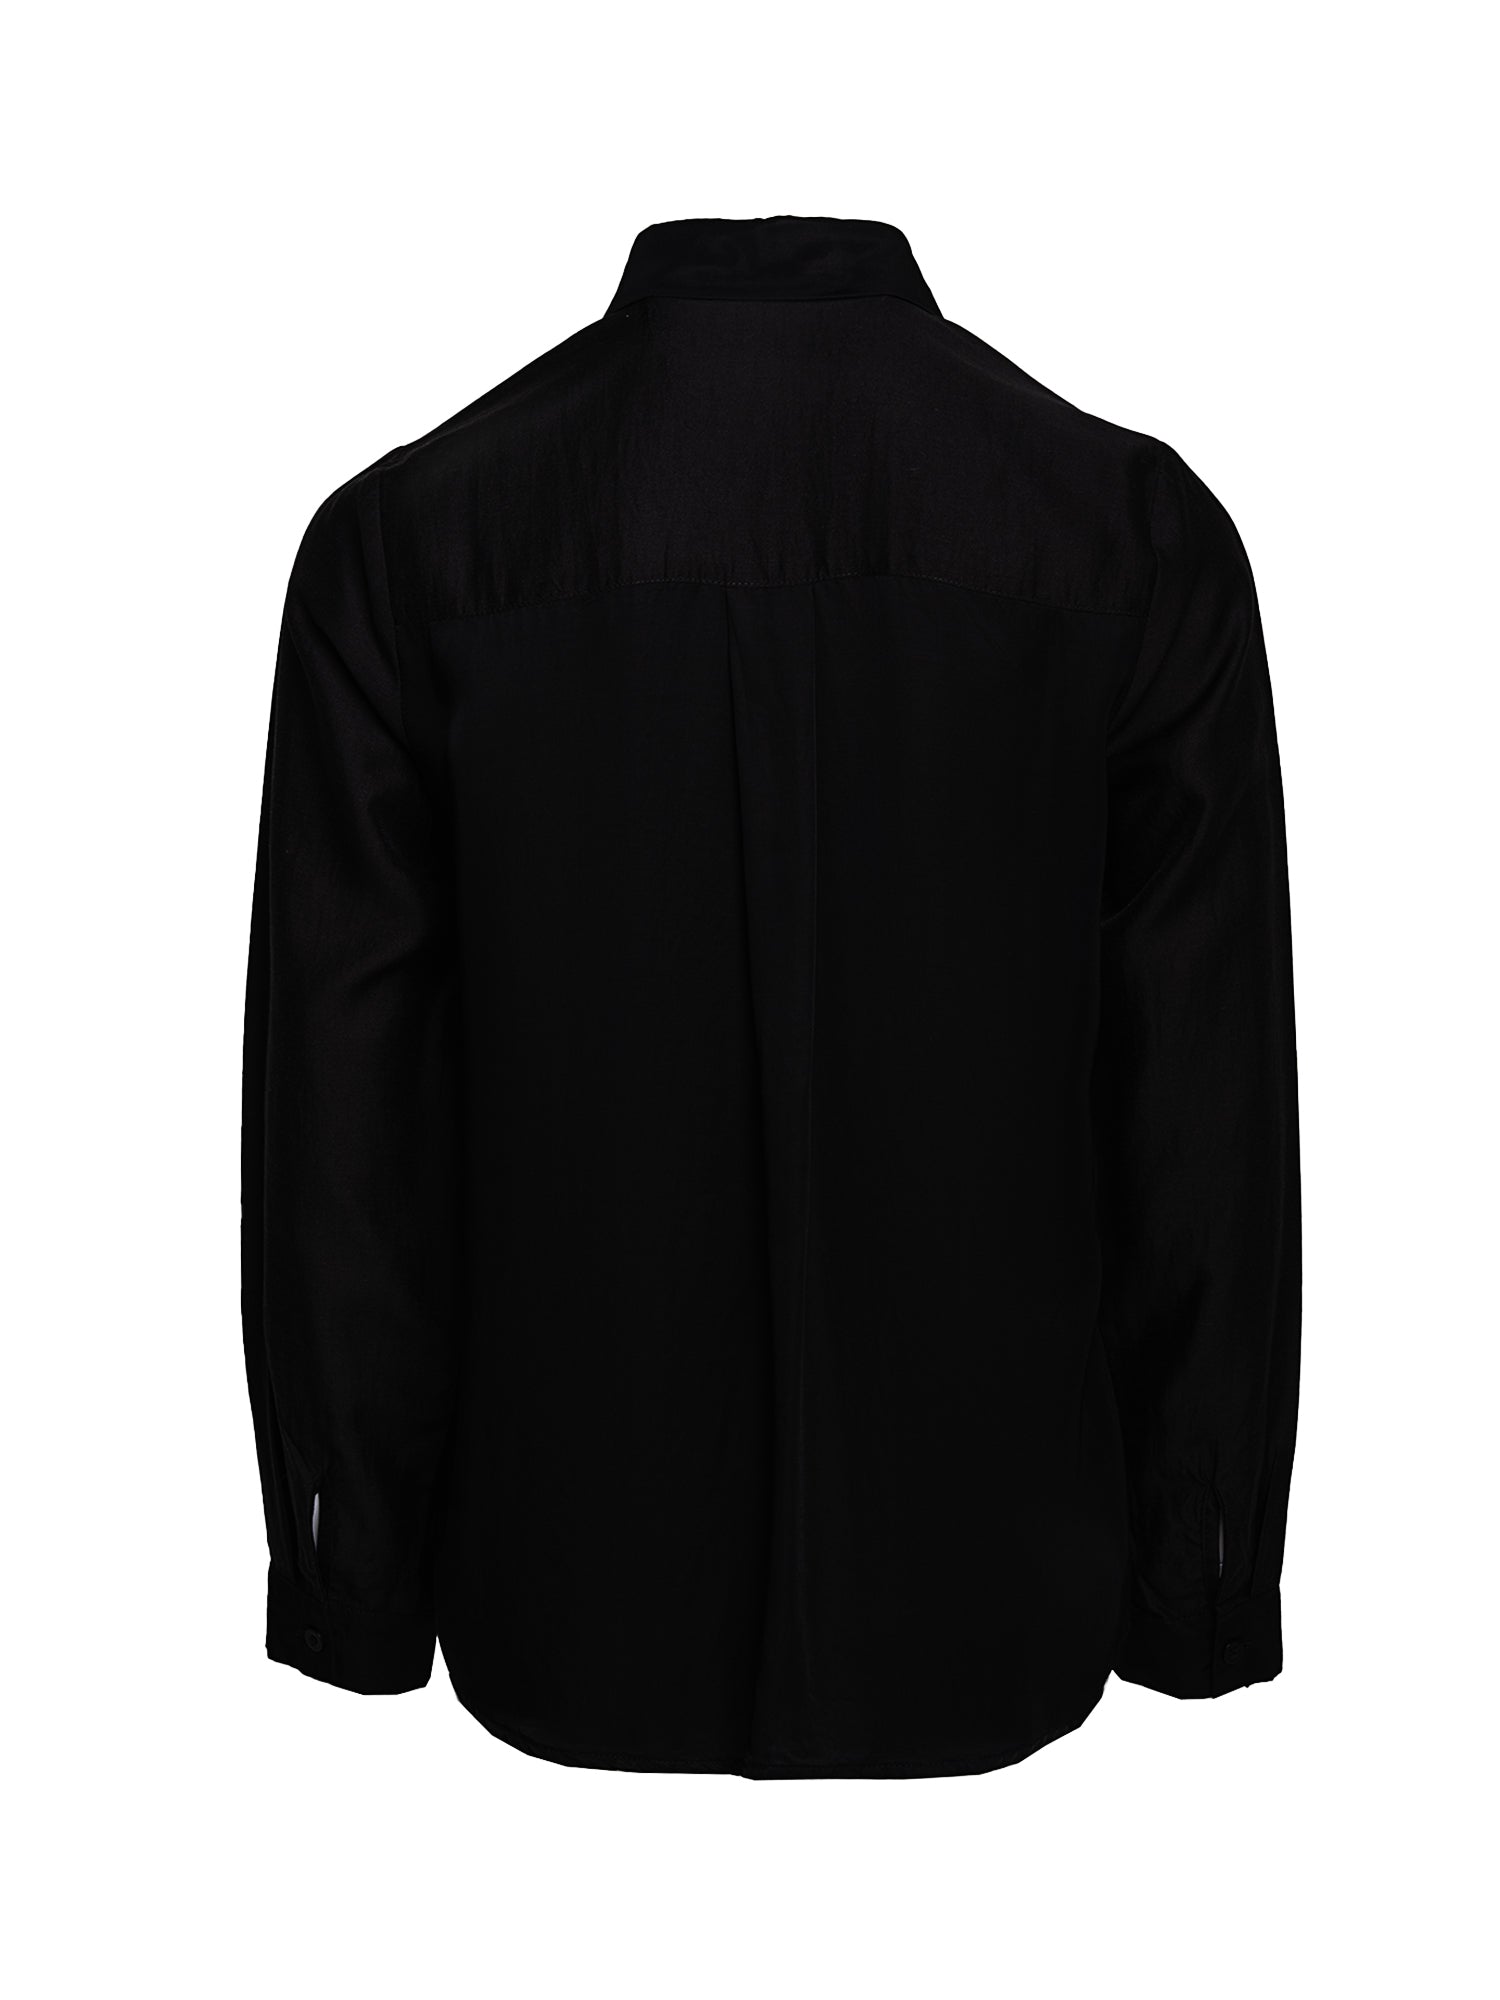 Blanche Long Sleeve Shirt with Sheer Panels